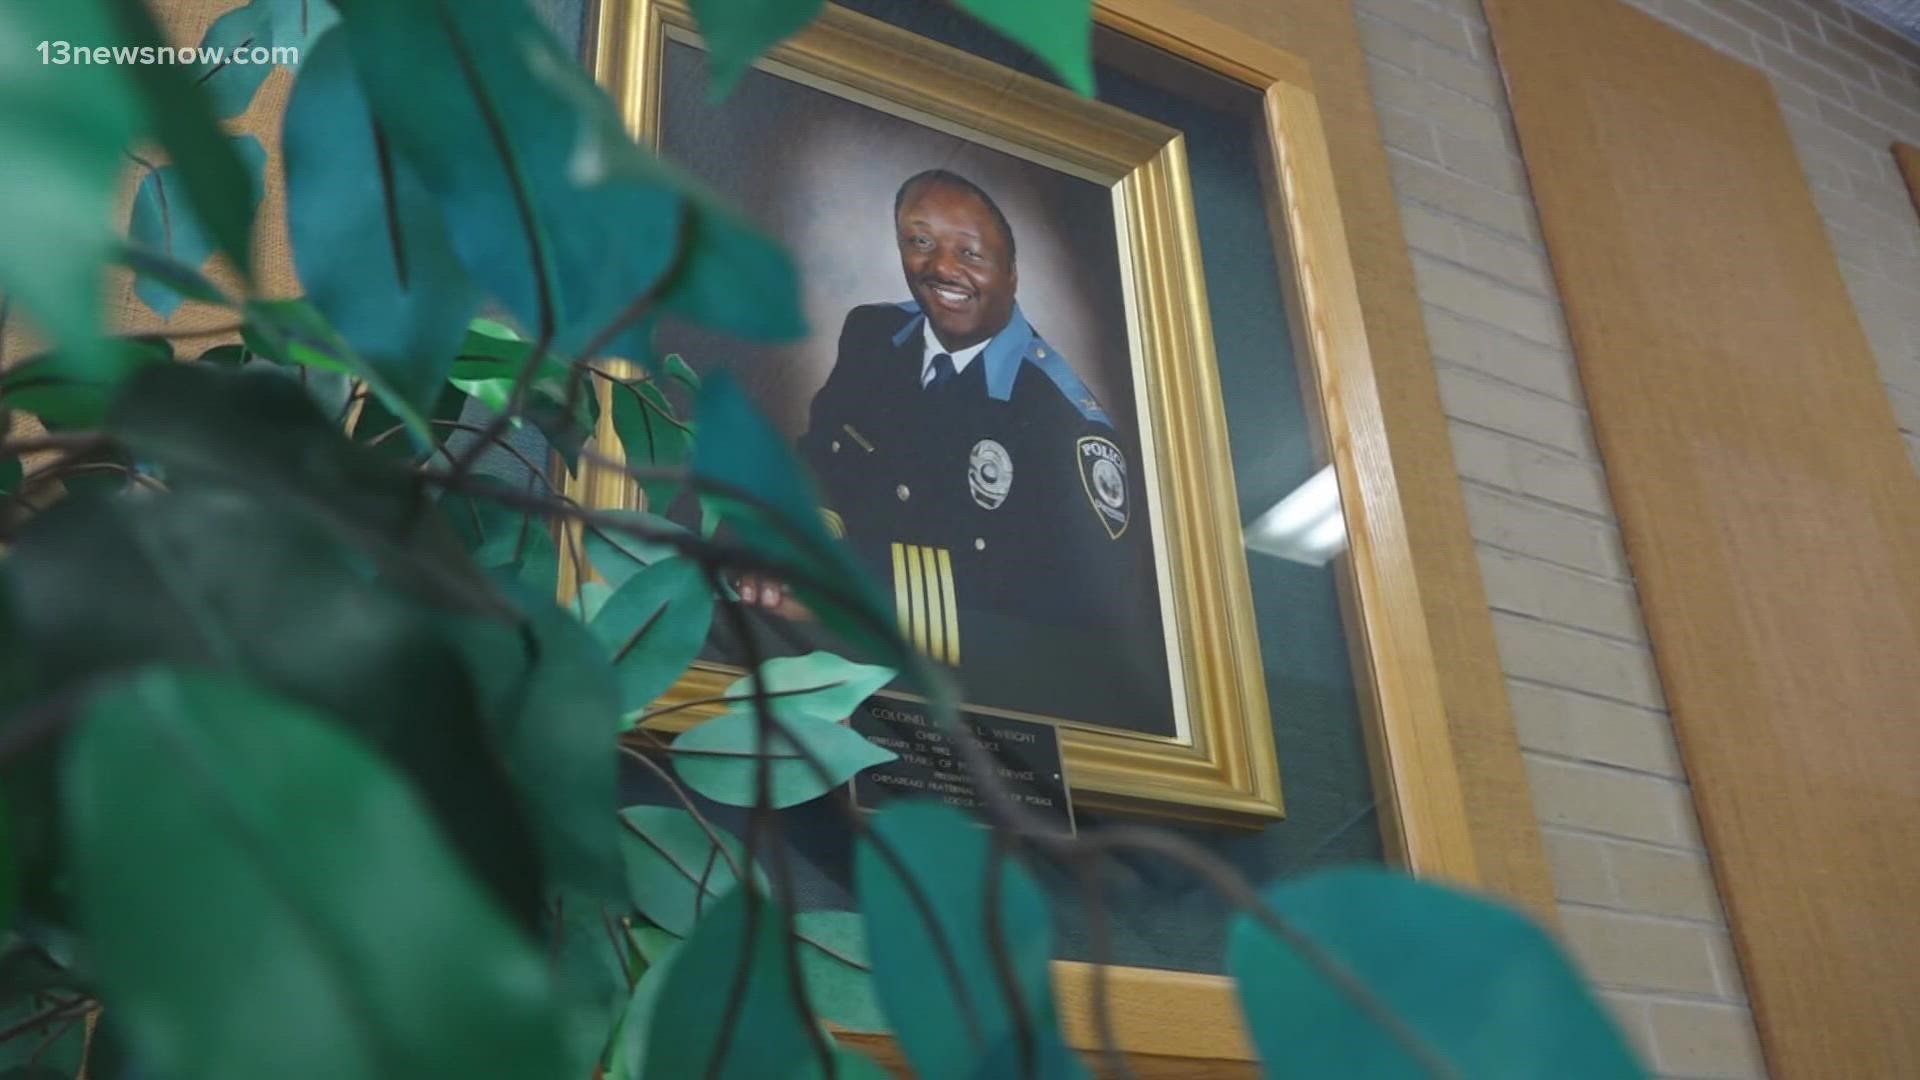 In two neighboring cities, searches for new police leadership are also underway.